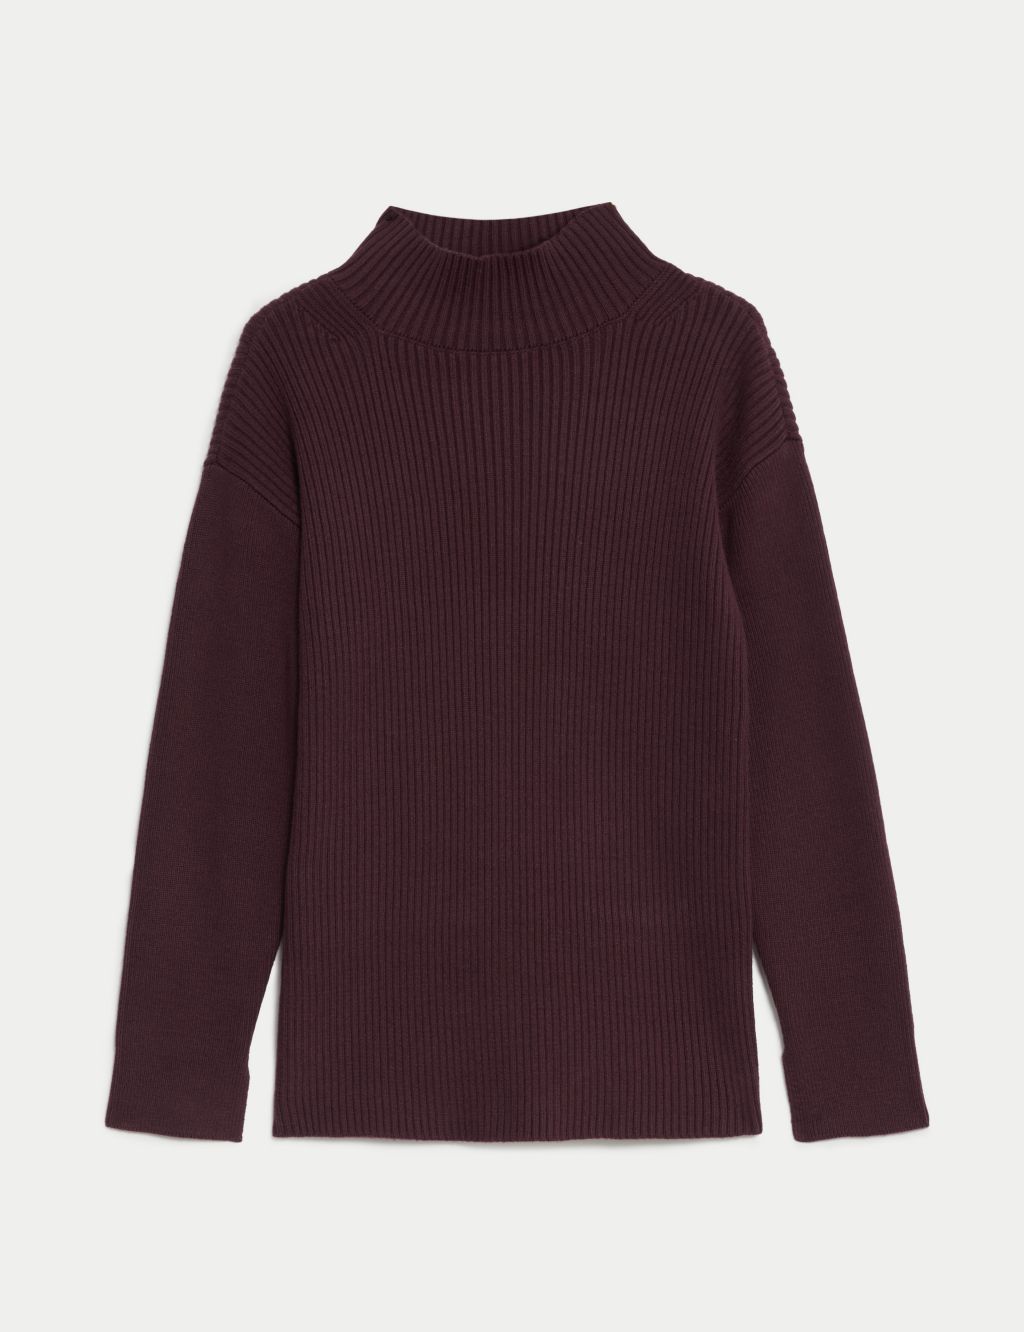 Cotton Rich Jumper With Merino Wool image 2